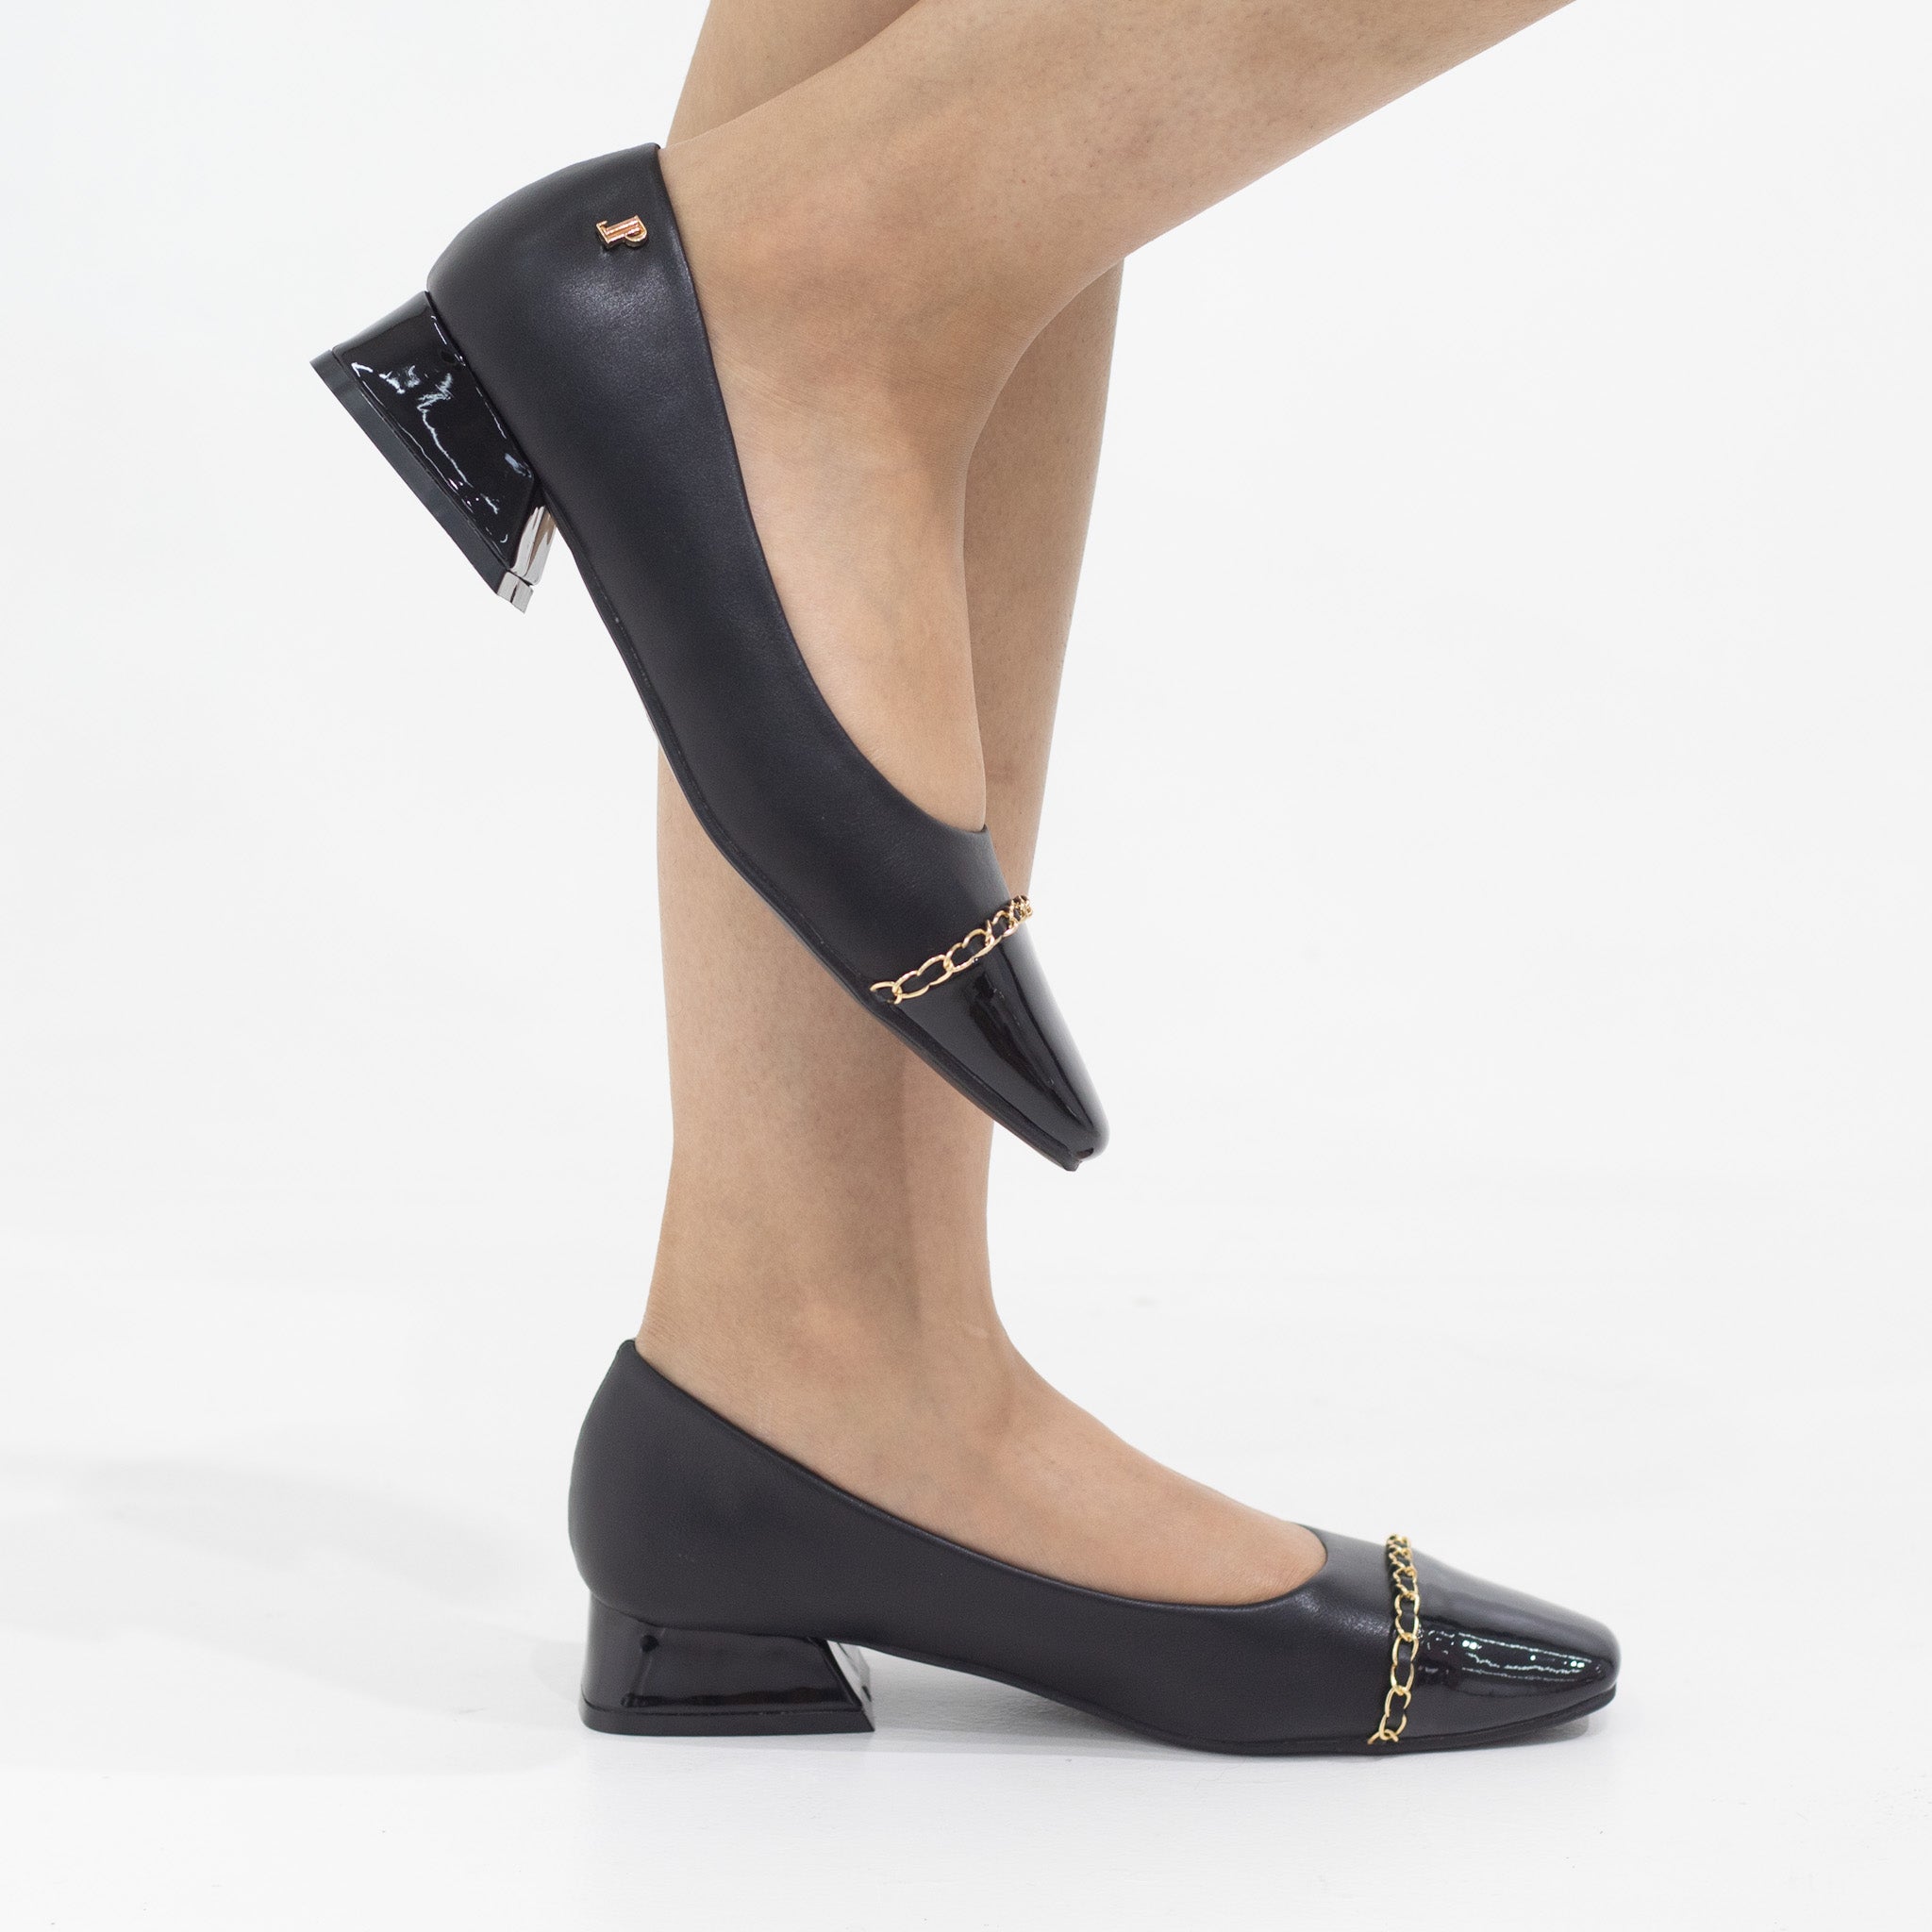 Laika two toned 2.5cm heel with court black